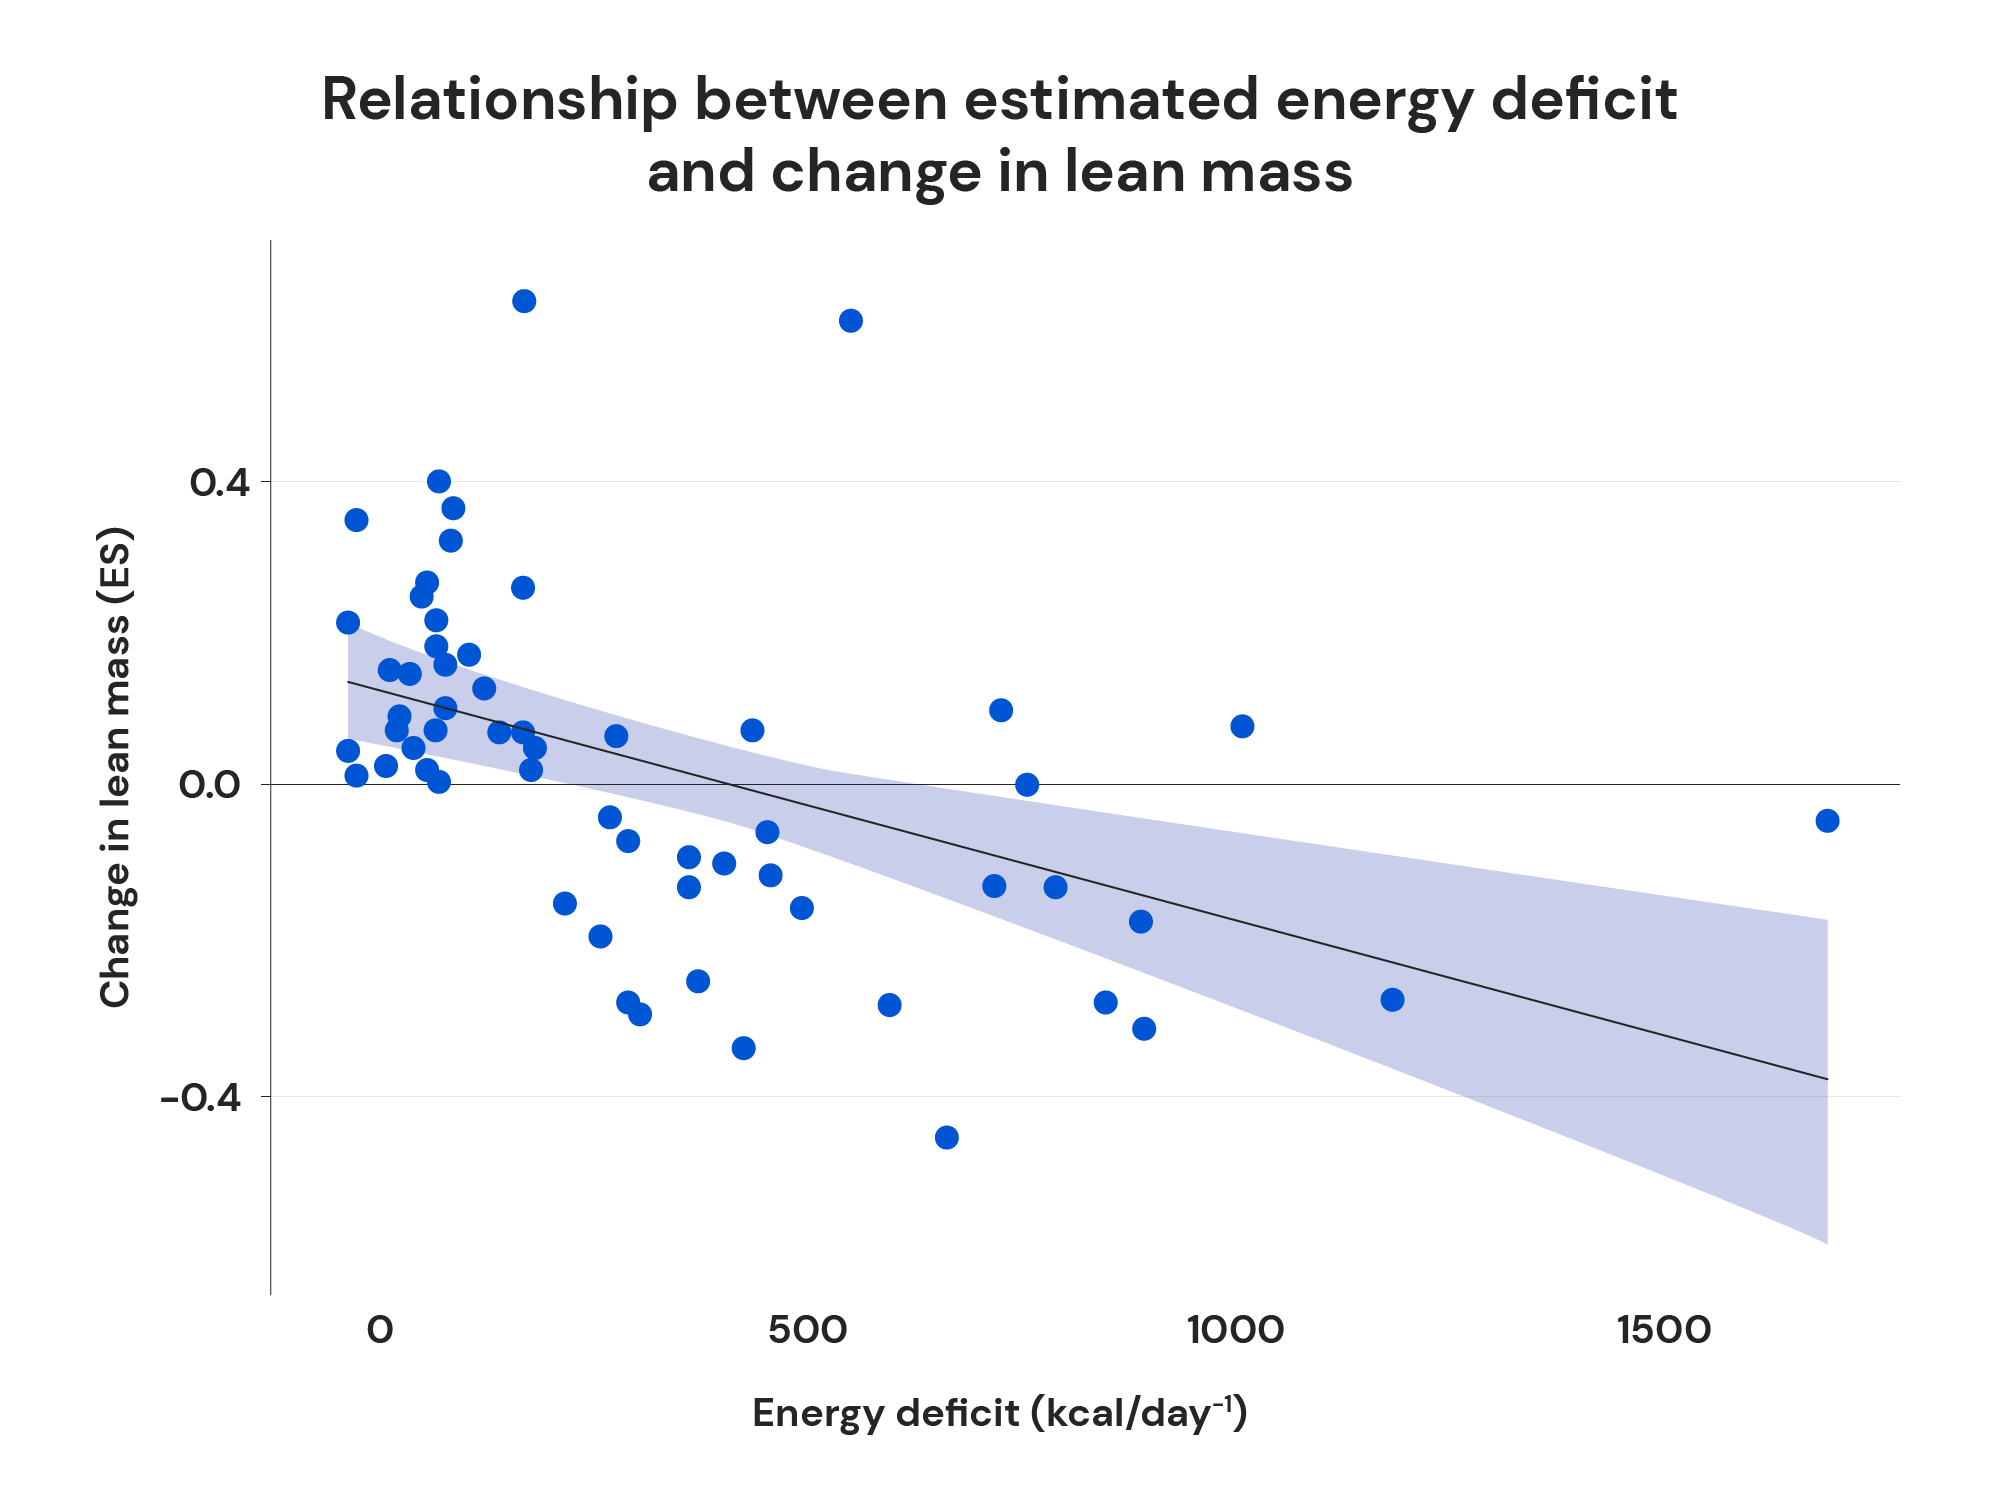 Relationship between estimated energy deficit and changes in lean mass